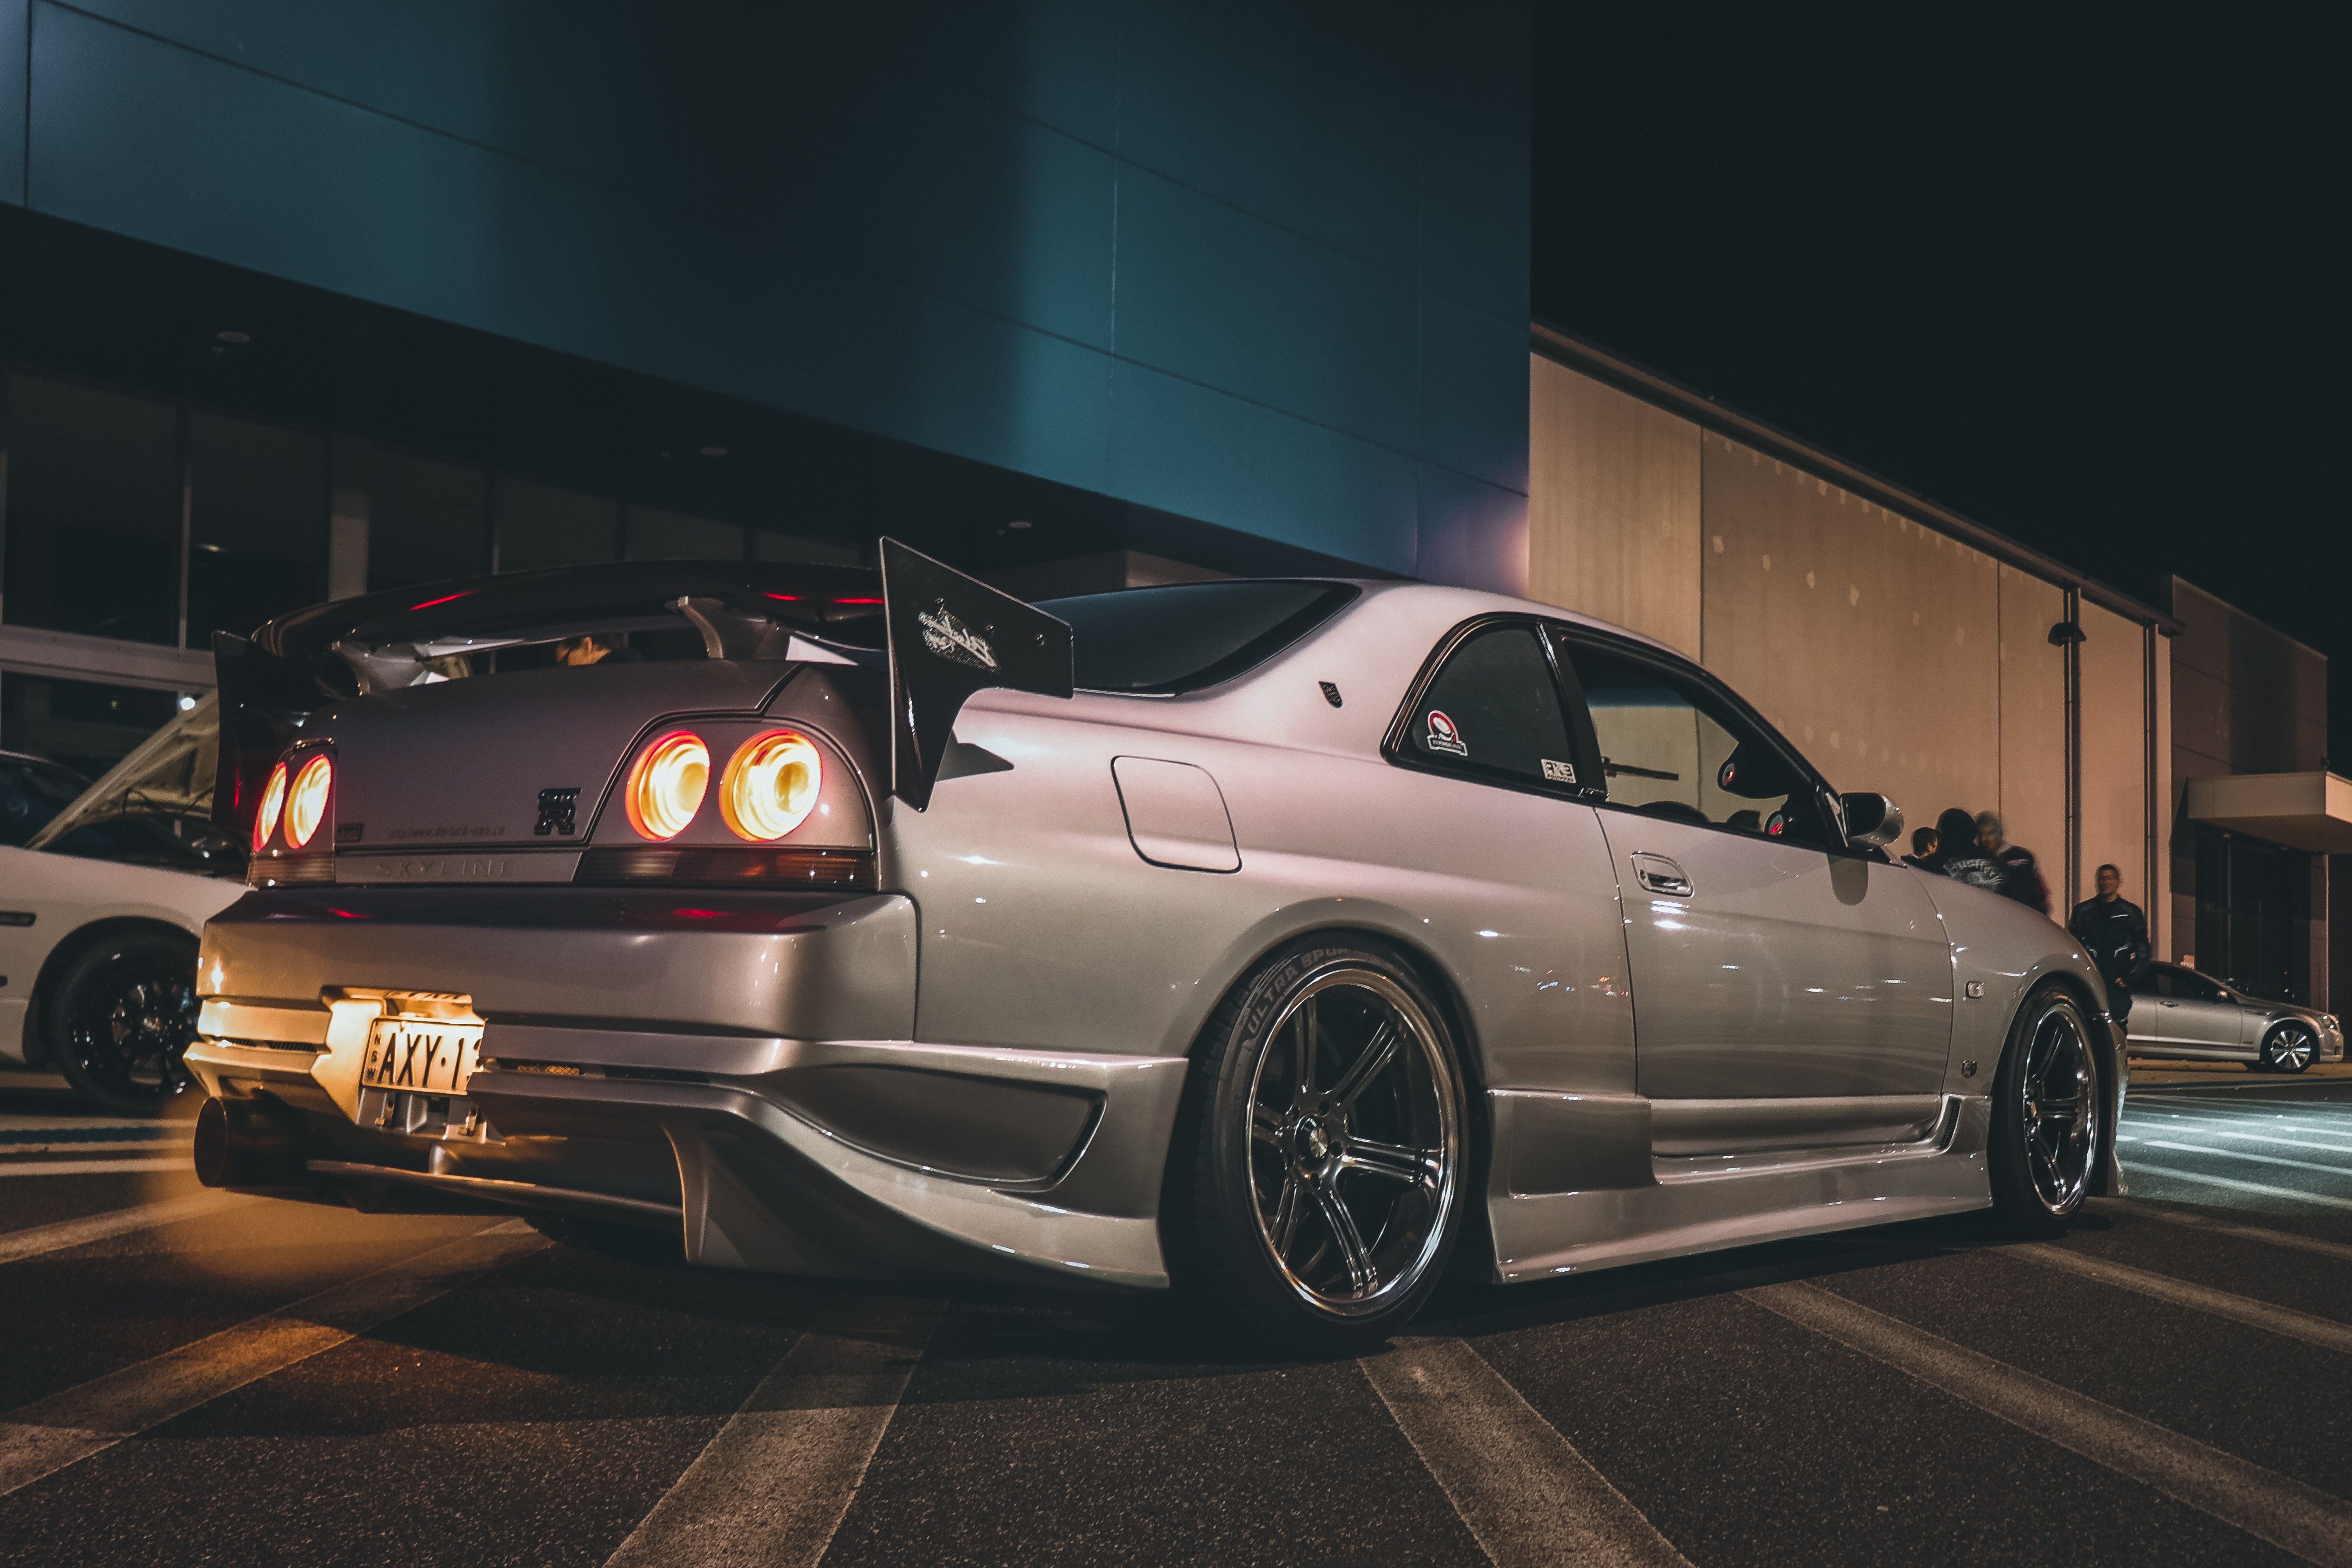 A silver R34 GTR with a massive wing and a plate that says 